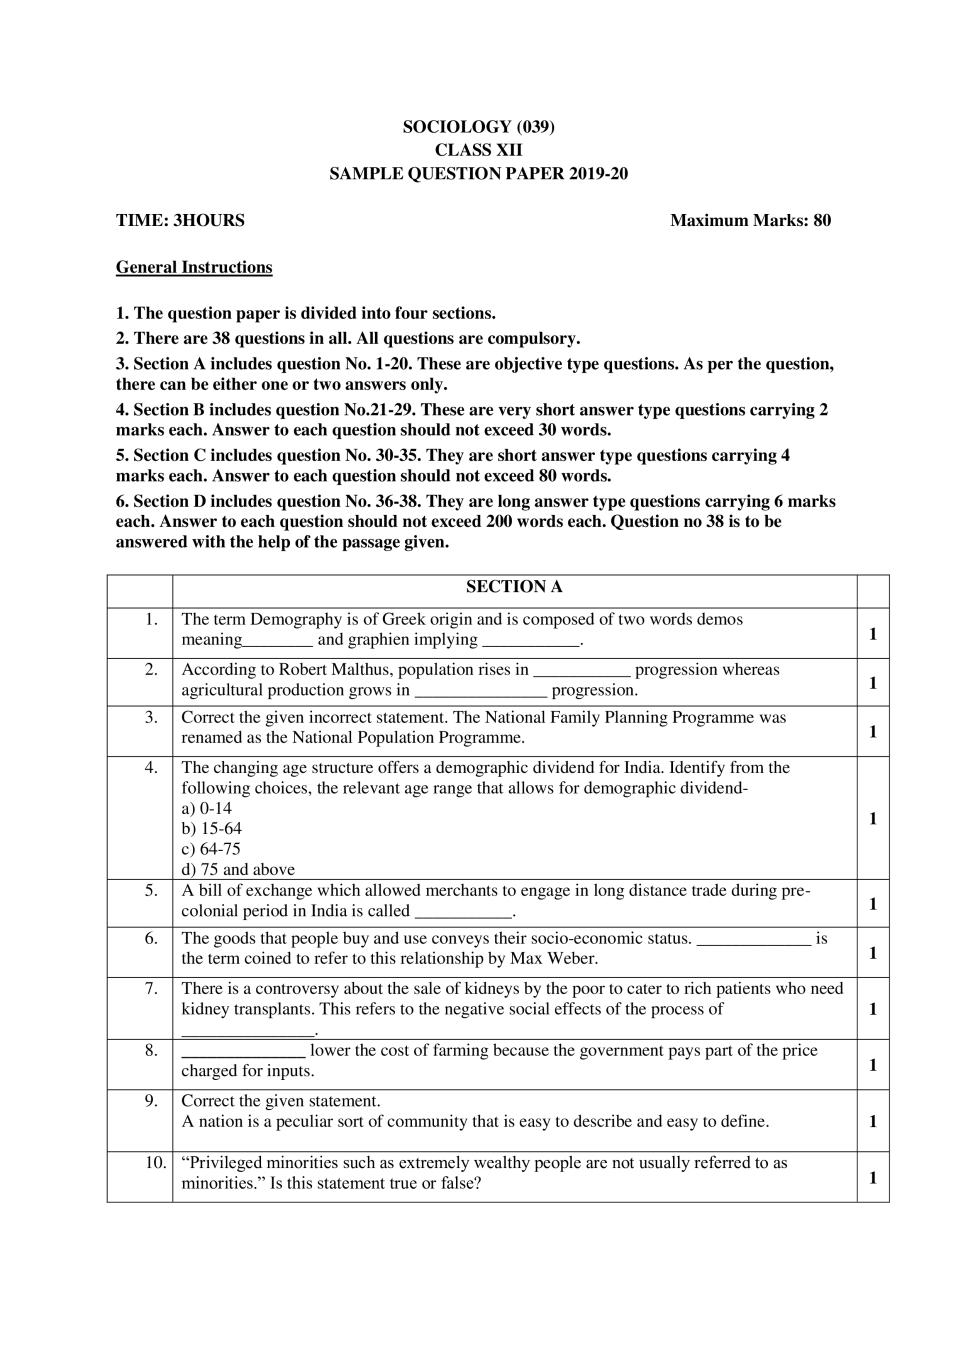 CBSE Class 12 Sample Paper 2020 for Sociology - Page 1